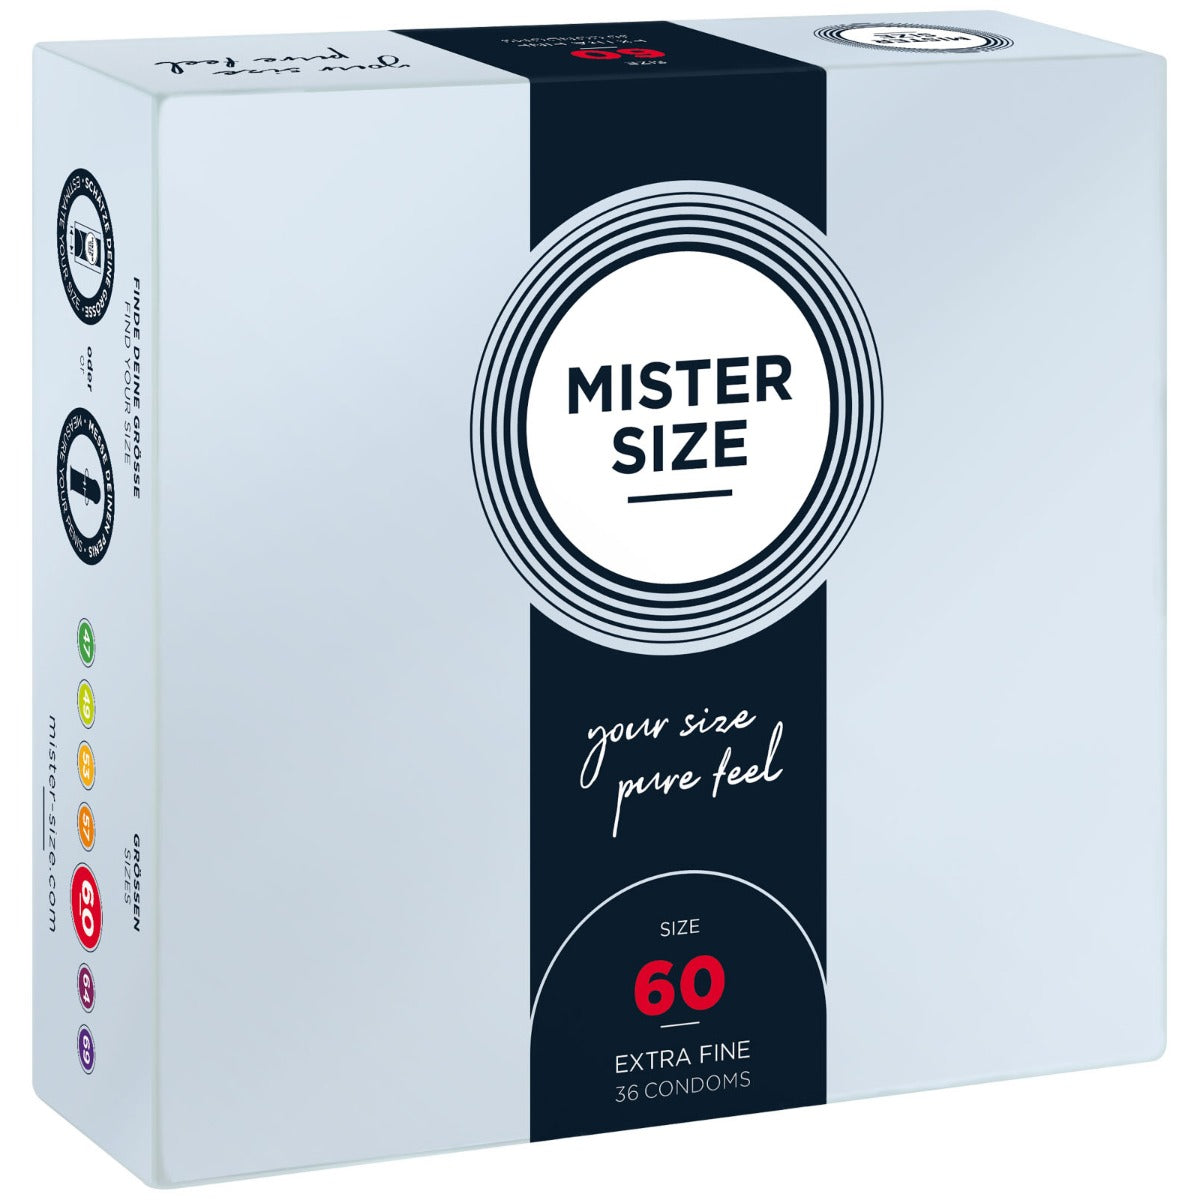 MISTER SIZE | Pure feel Condoms - Size 60 mm (36 pack)